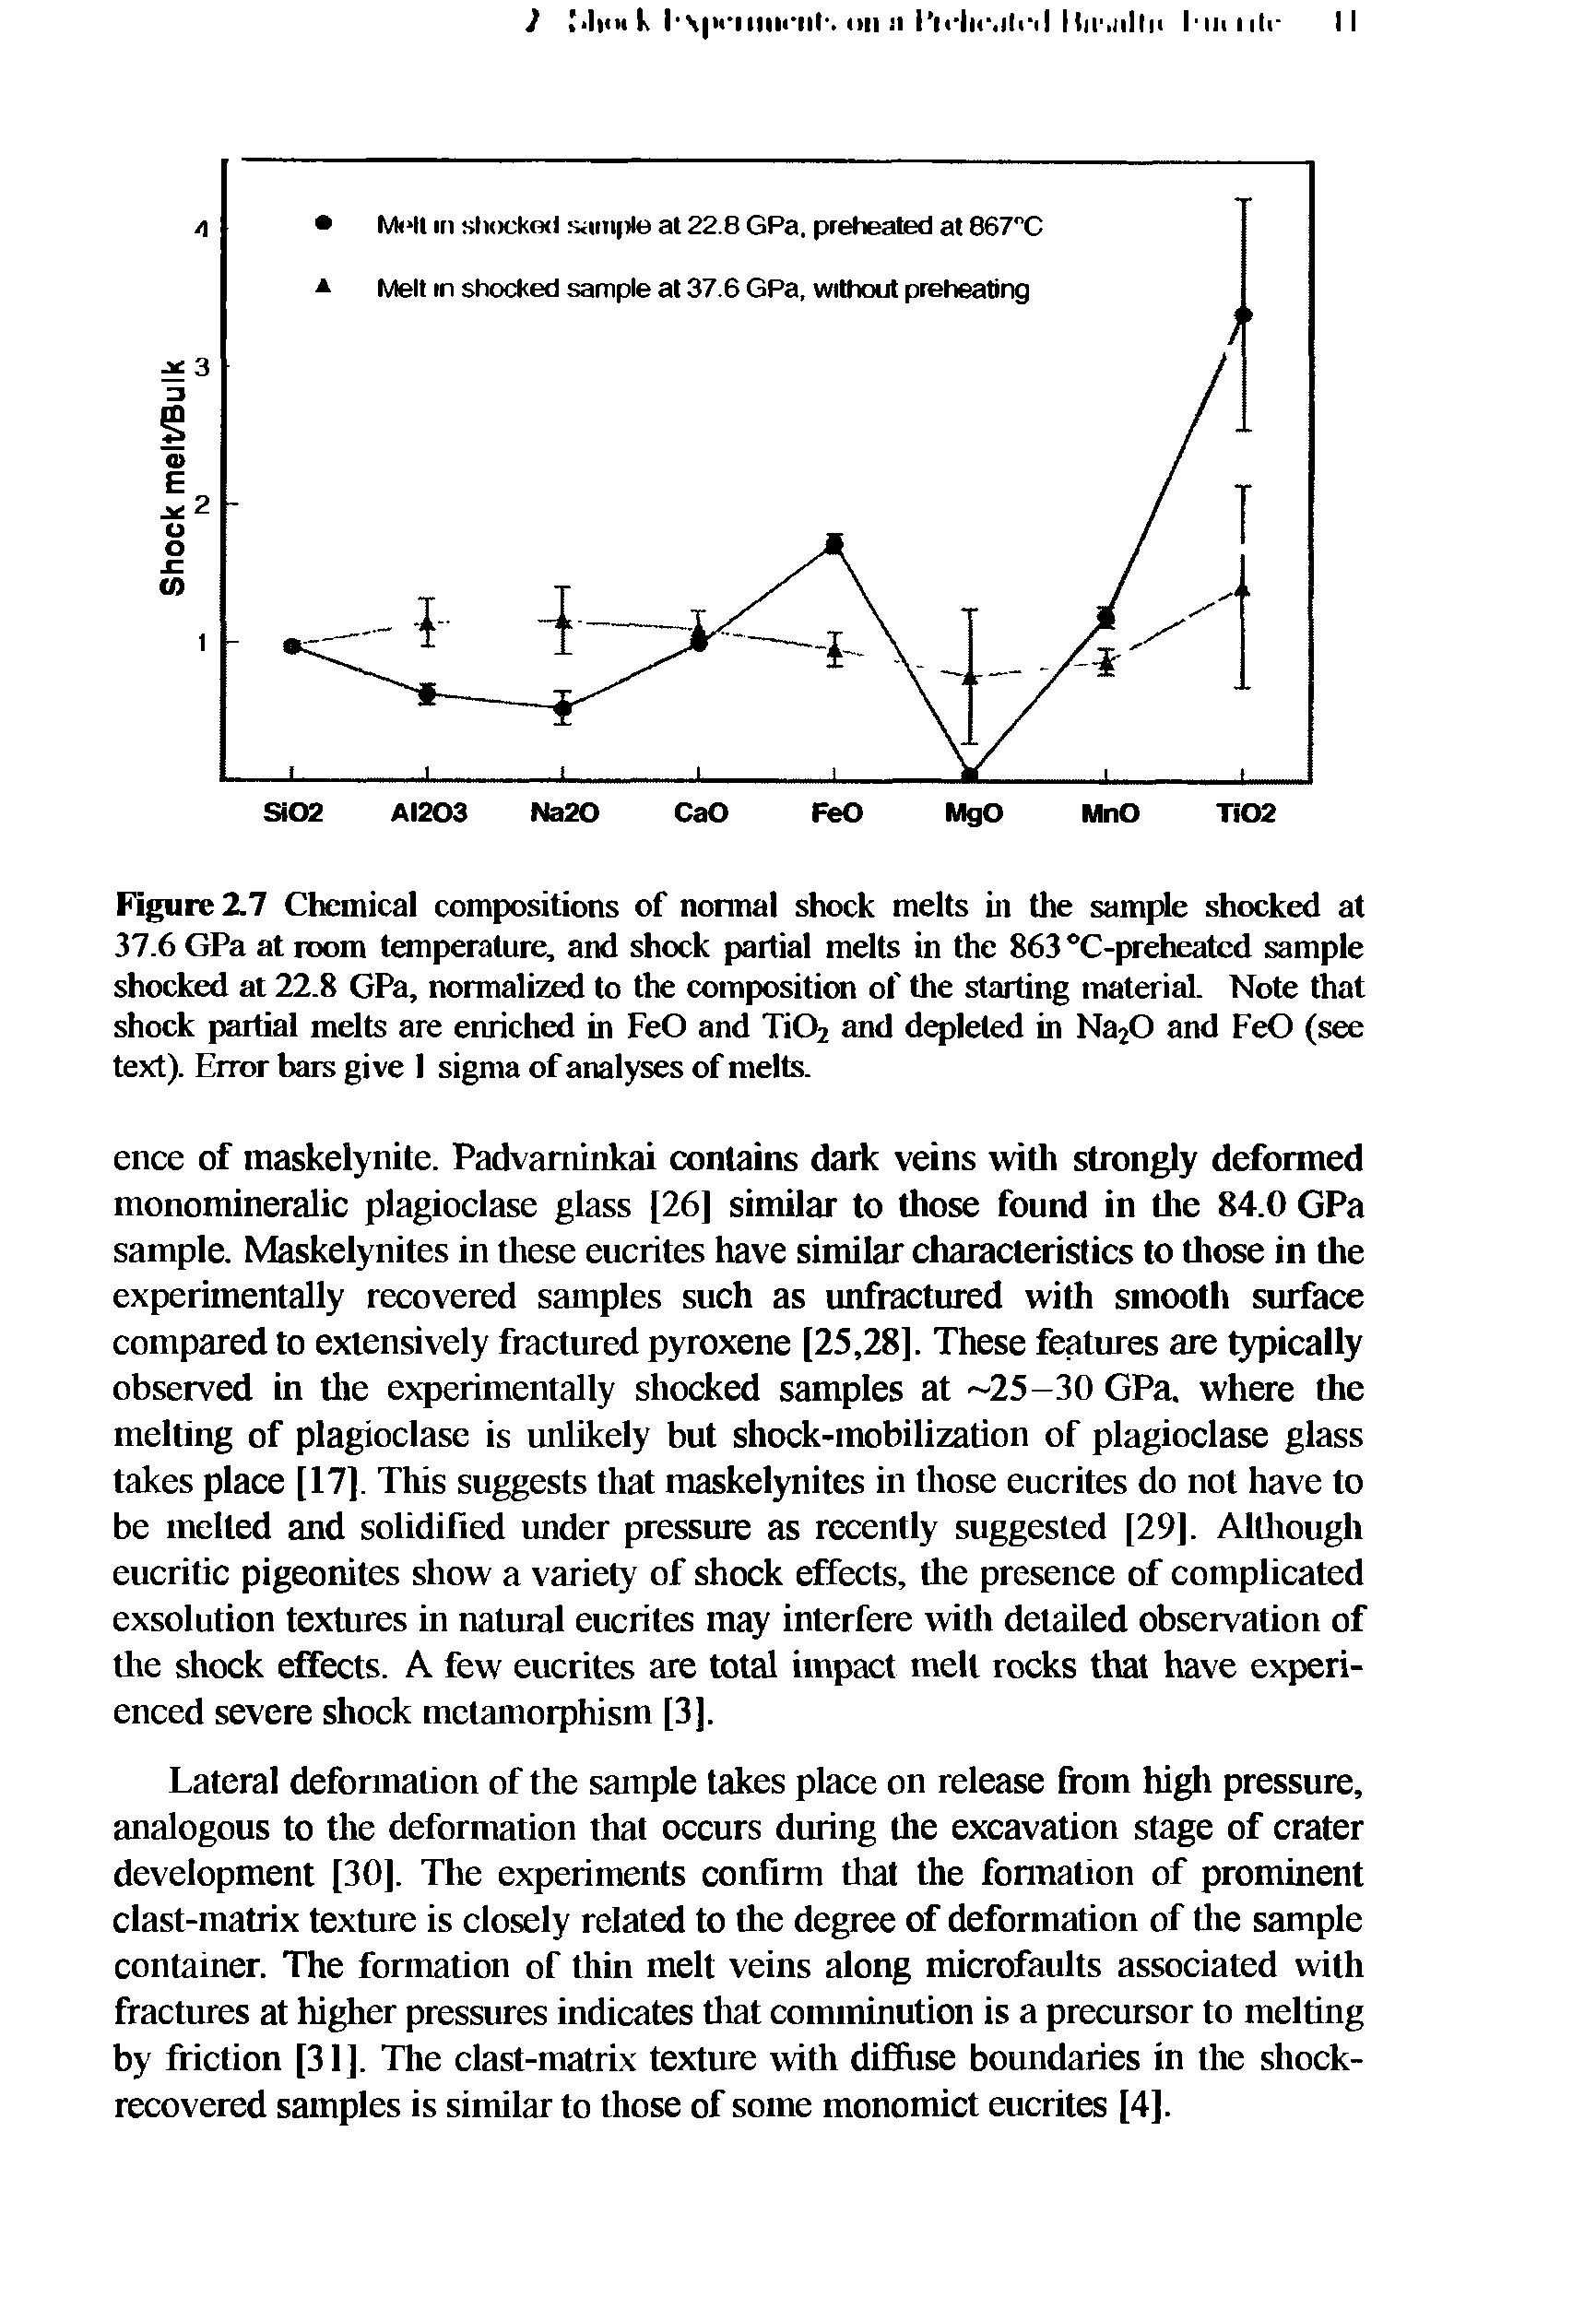 Figure Z7 Chemical compositions of nonnal shock melts in the sample shocked at 37.6 GPa at loom temperature, and shock partial melts in the 863 °C-preheated sample shocked at 22.8 GPa, normalized to the composition of the starting material. Note that shock partial melts are enriched in FeO and Xi02 and depleted in NaaO and FeO (see text). Error bars give 1 sigma of analyses of melts.